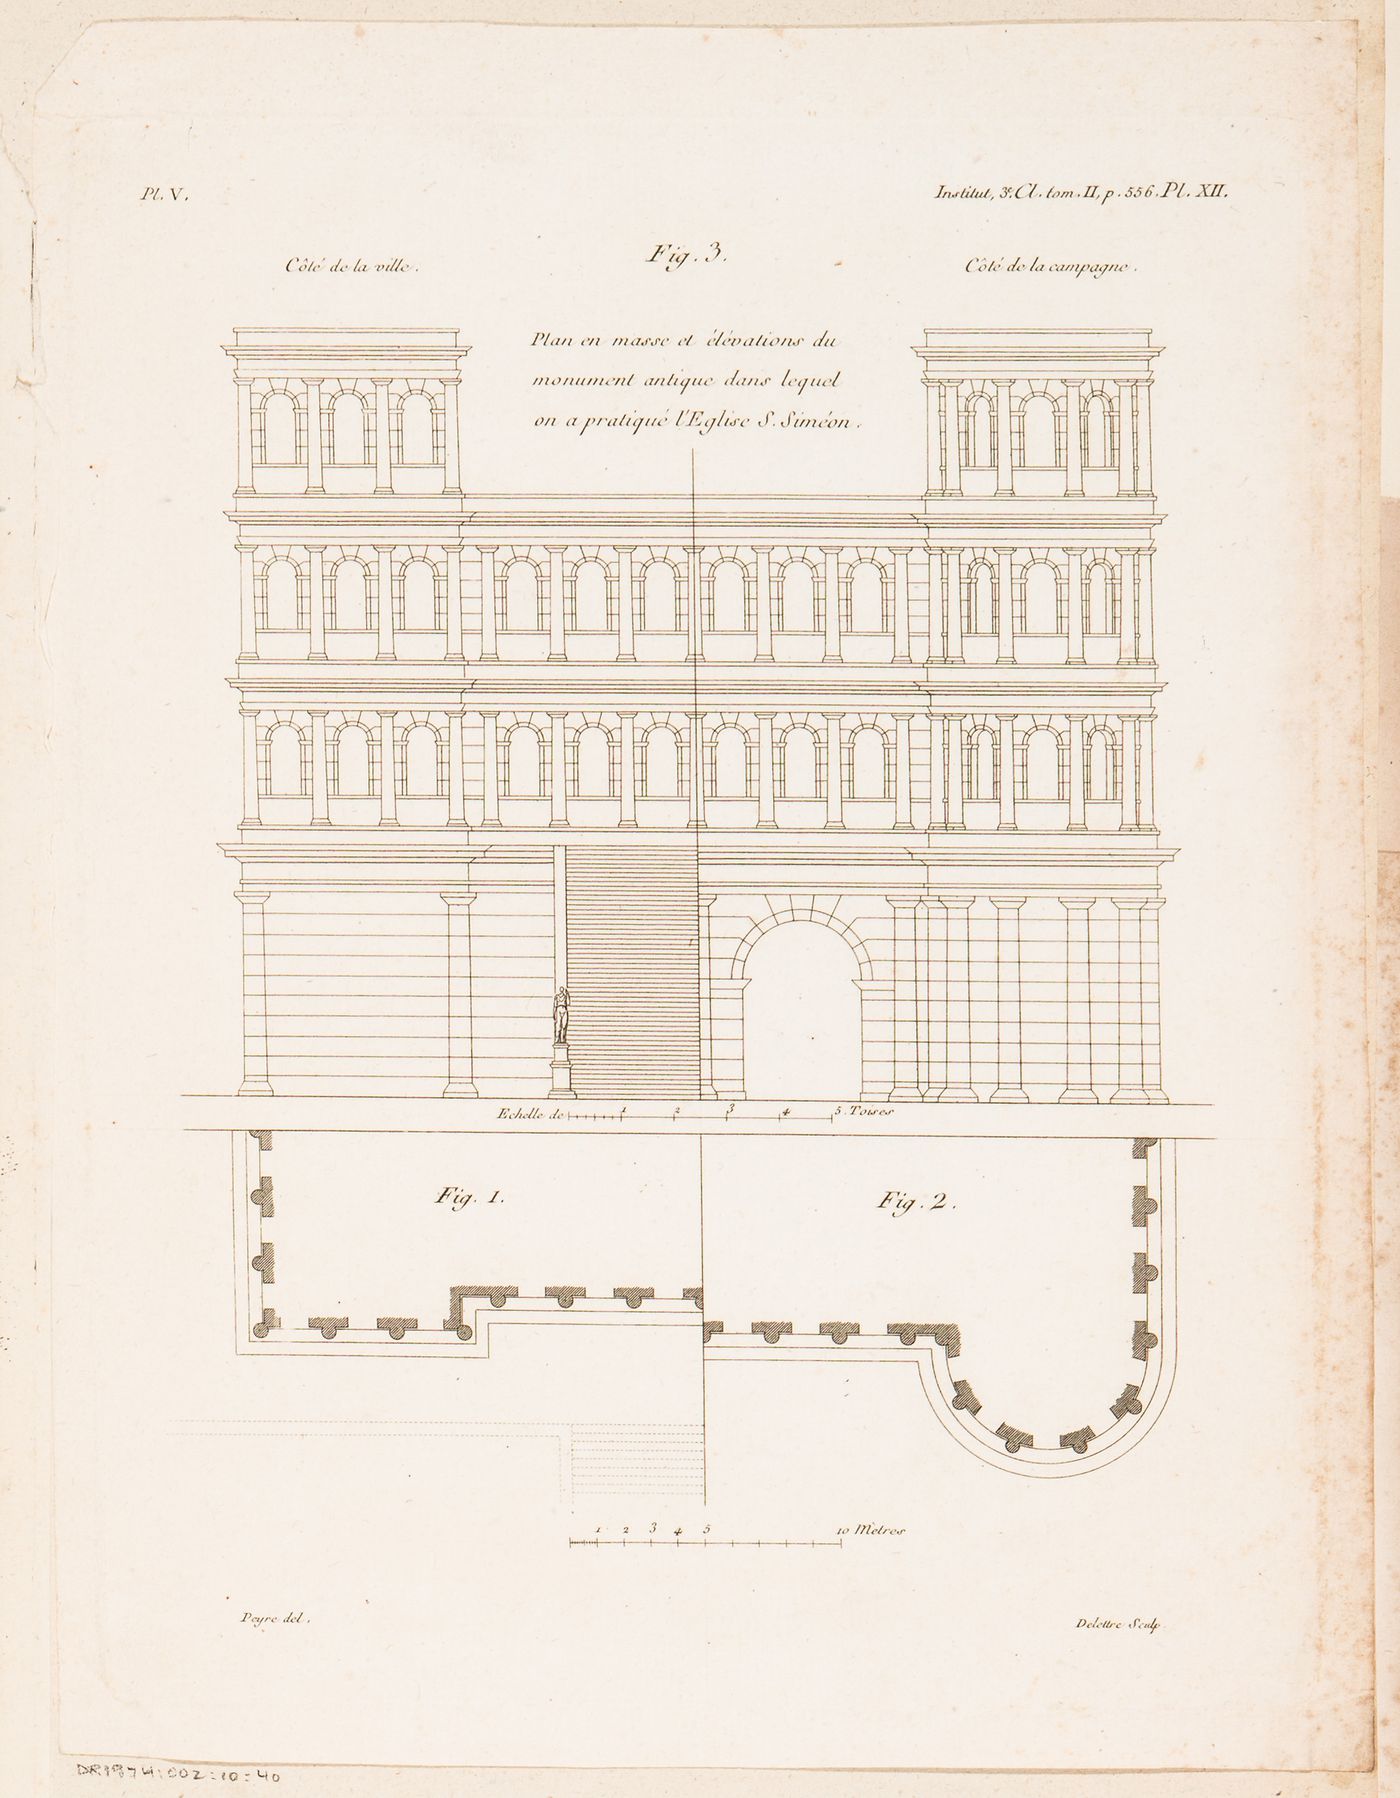 Elevations and plan for an antique monument erected in Église S. Siméon